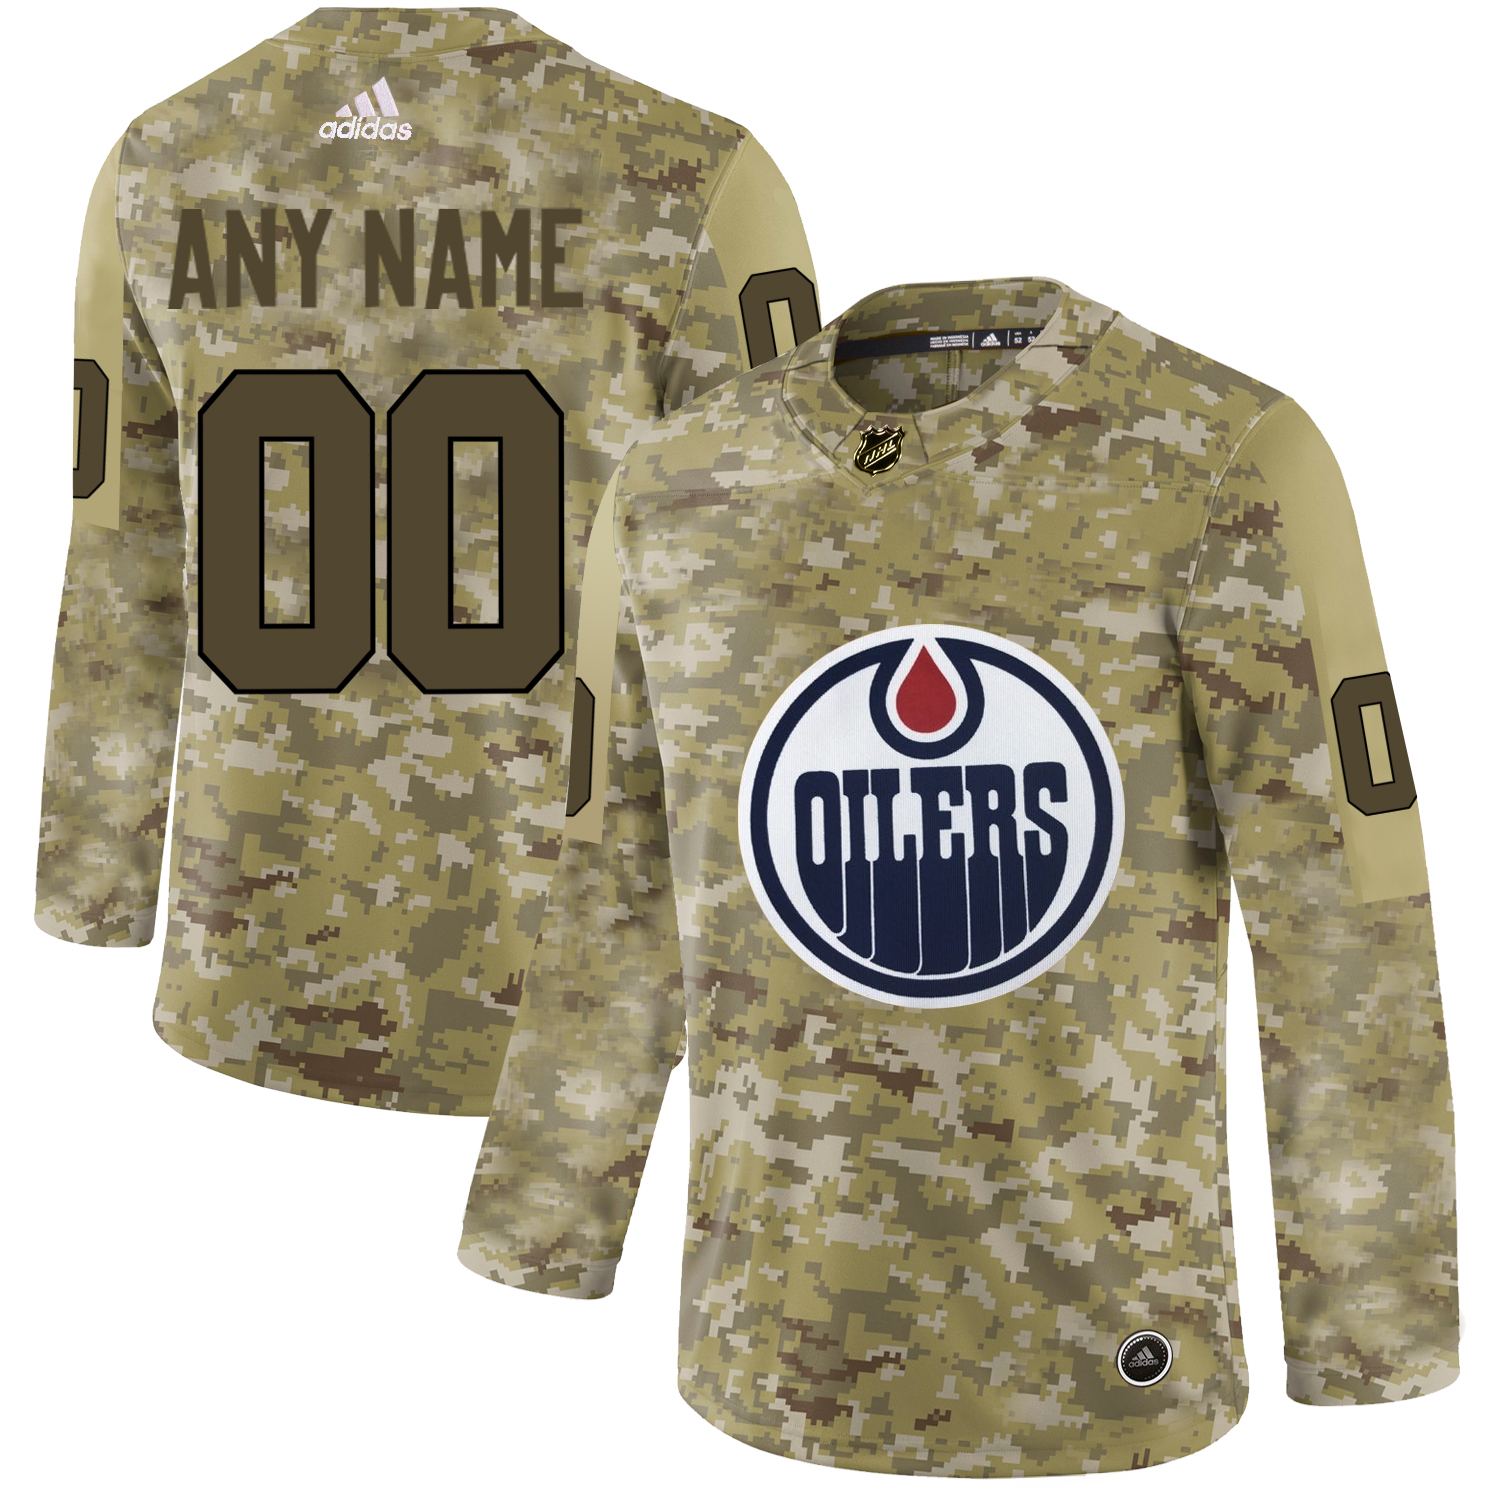 Men's Adidas Oilers Personalized Camo Authentic NHL Jersey